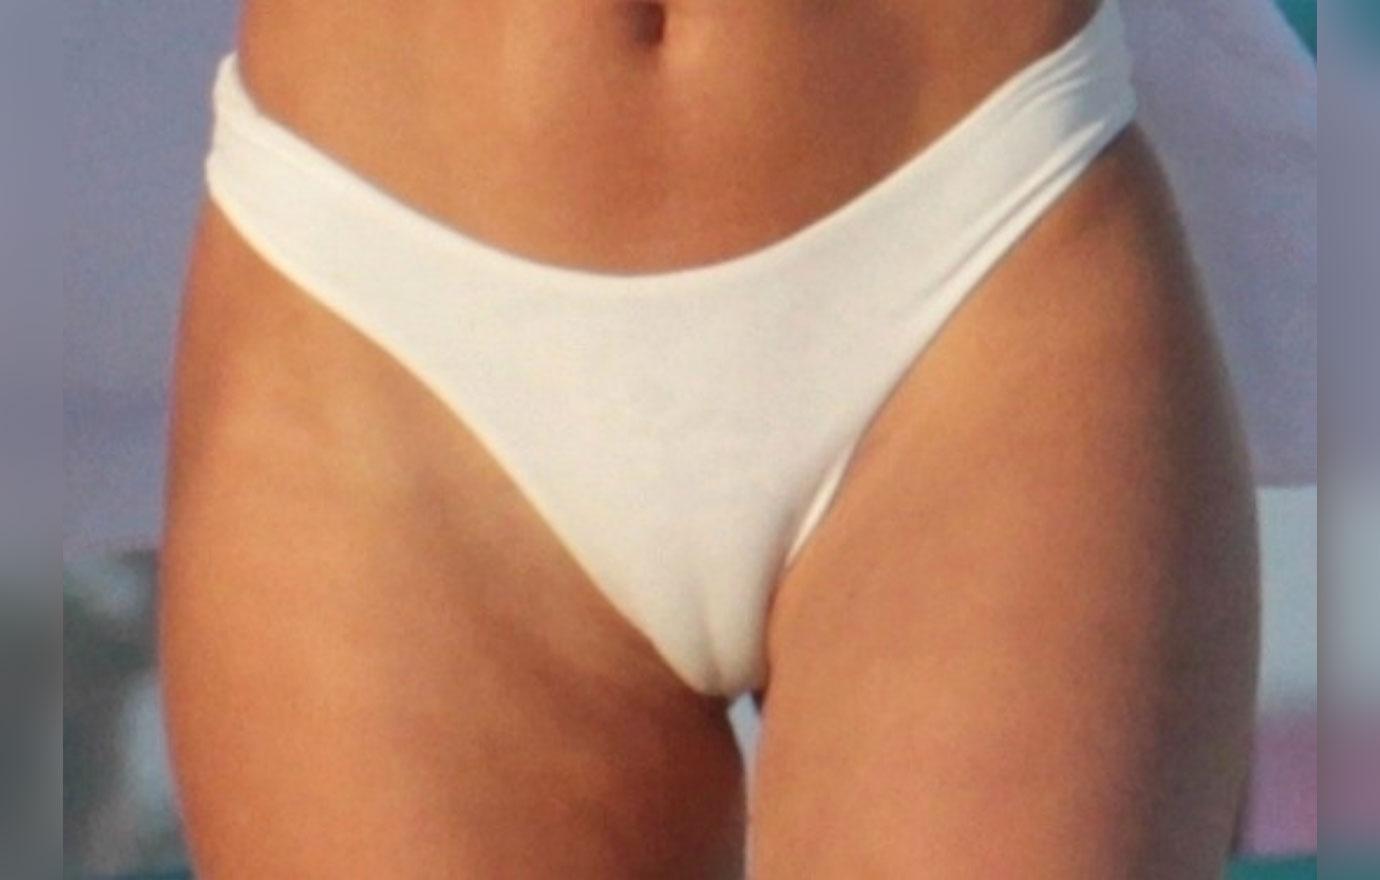 cassie ewing add photo pictures of camel toes